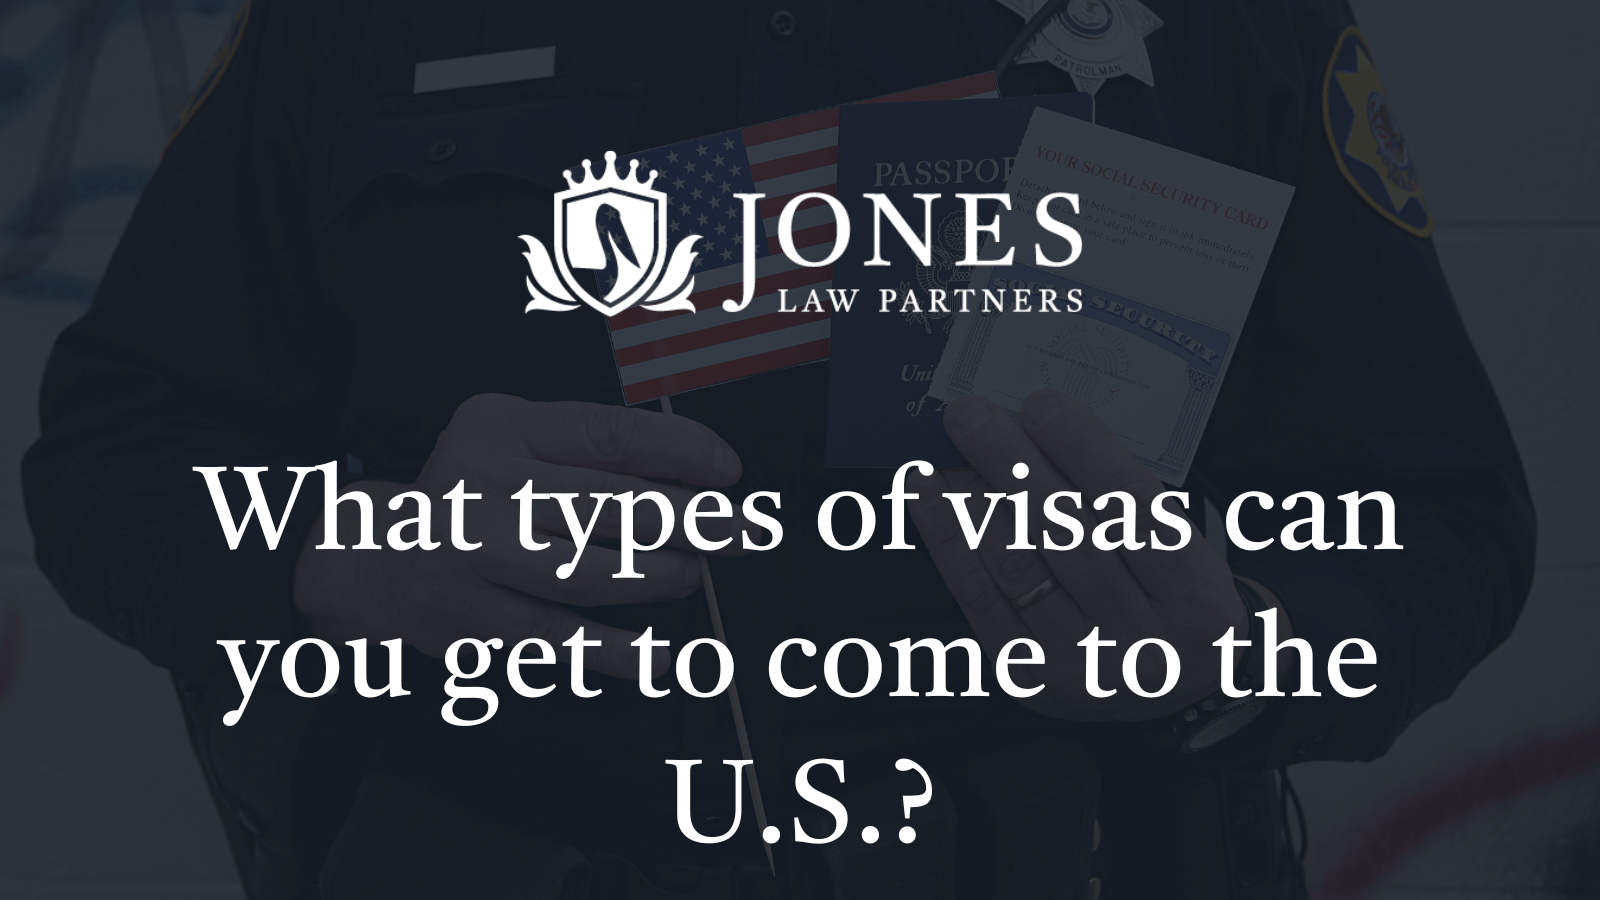 What types of visas can you get to come to the U.S. - jones law partners alexandria louisiana